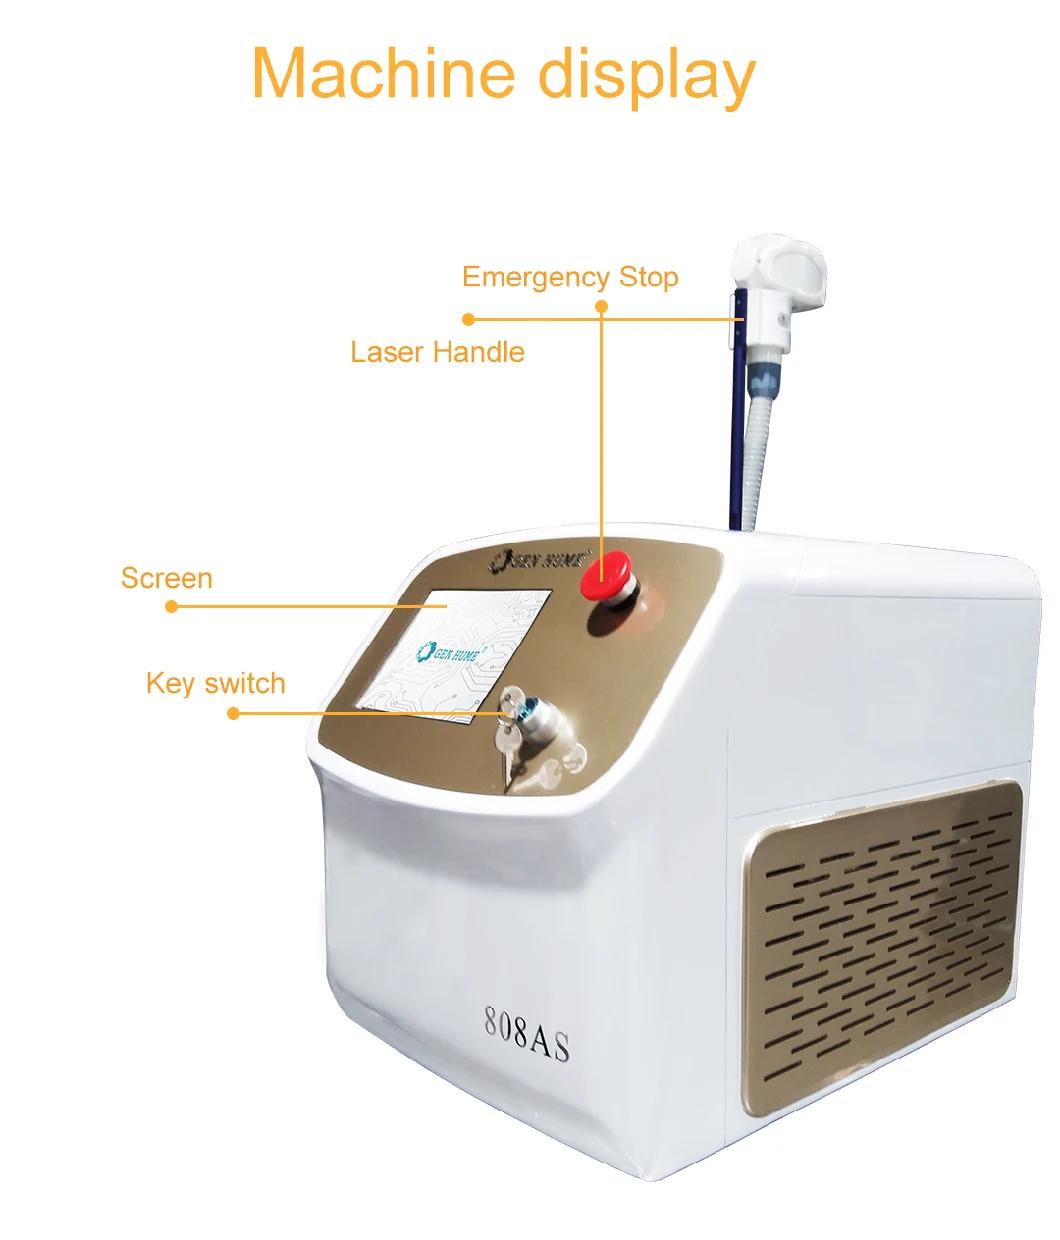 Machine Portable 808nm Diode Laser Medical Portable Epilation Beauty Salon Equipment Diode Laser Hair Removal